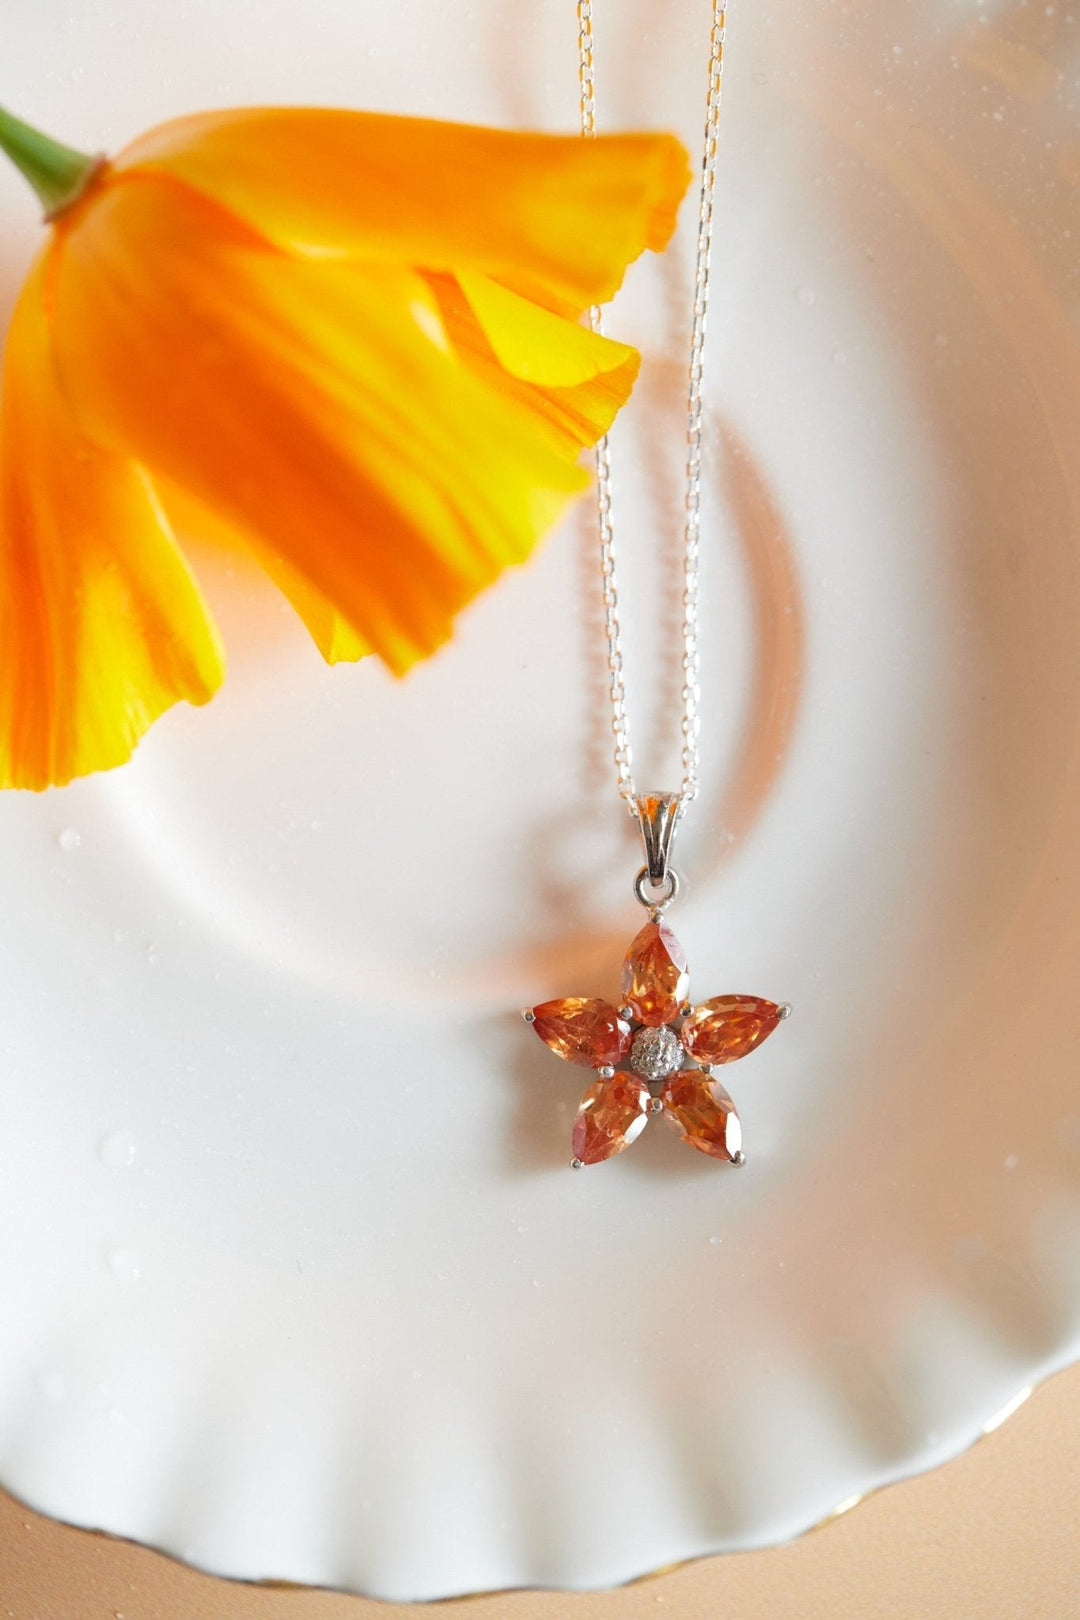 Aletheia Sunflower Sterling Silver Necklace. - Ema Jewels